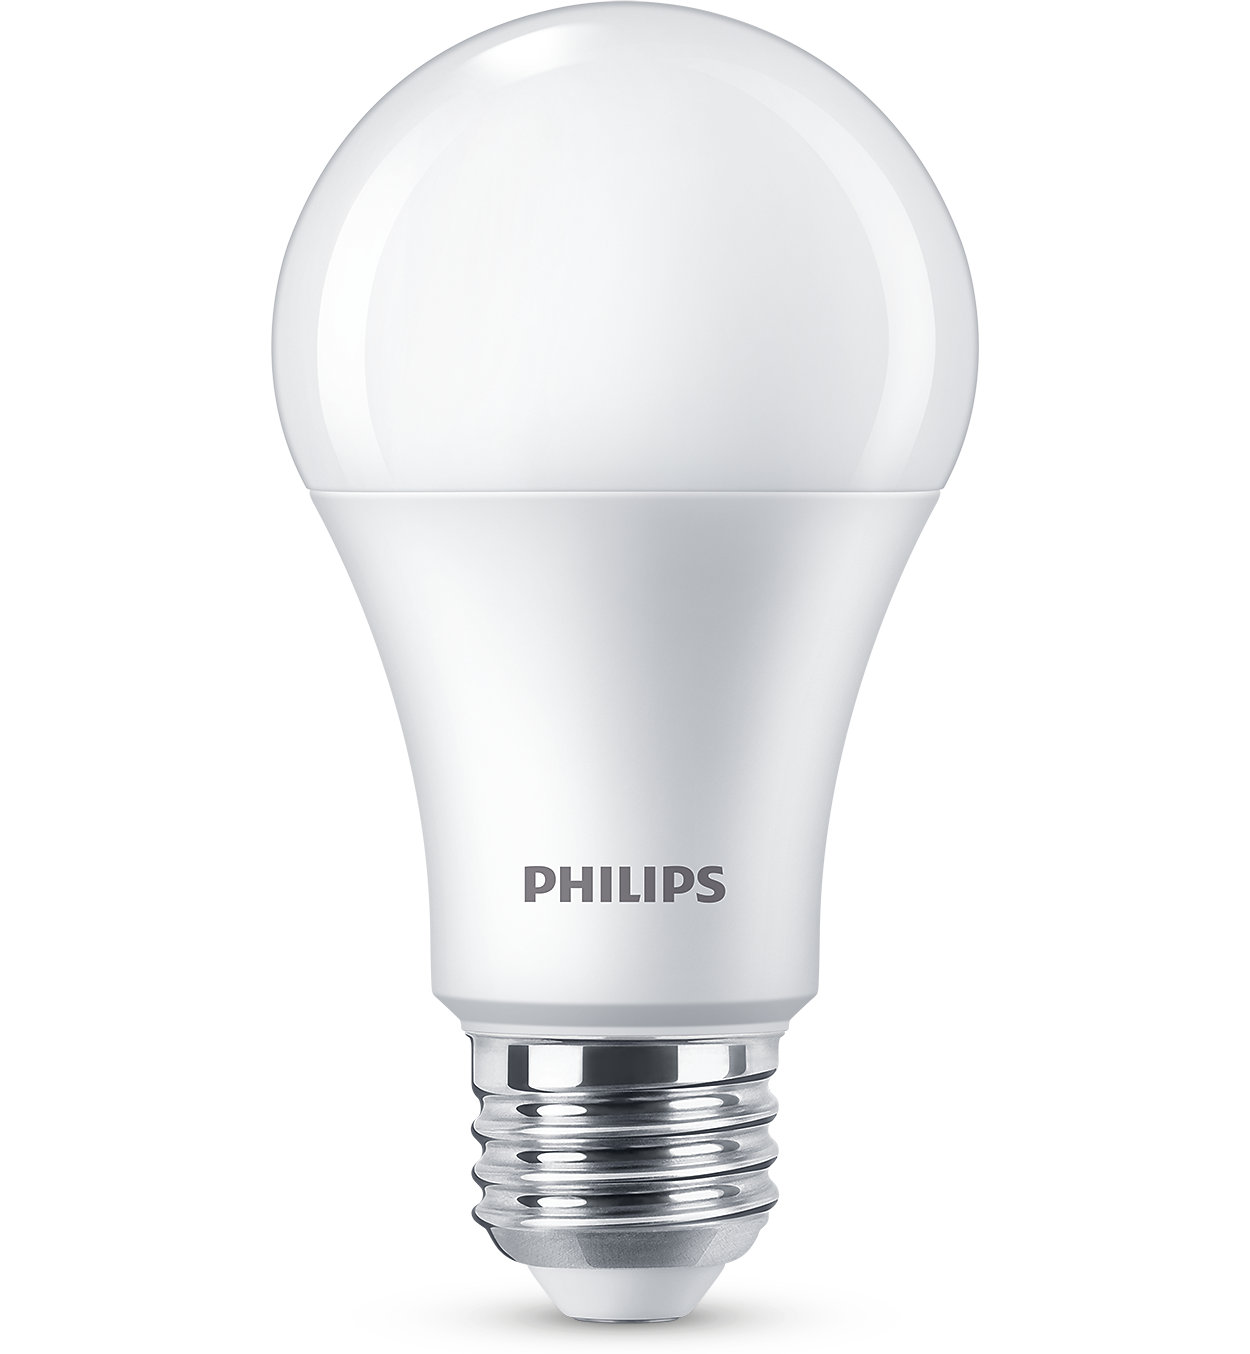 Attractive, dimmable, LED alternative to popular incandescent 